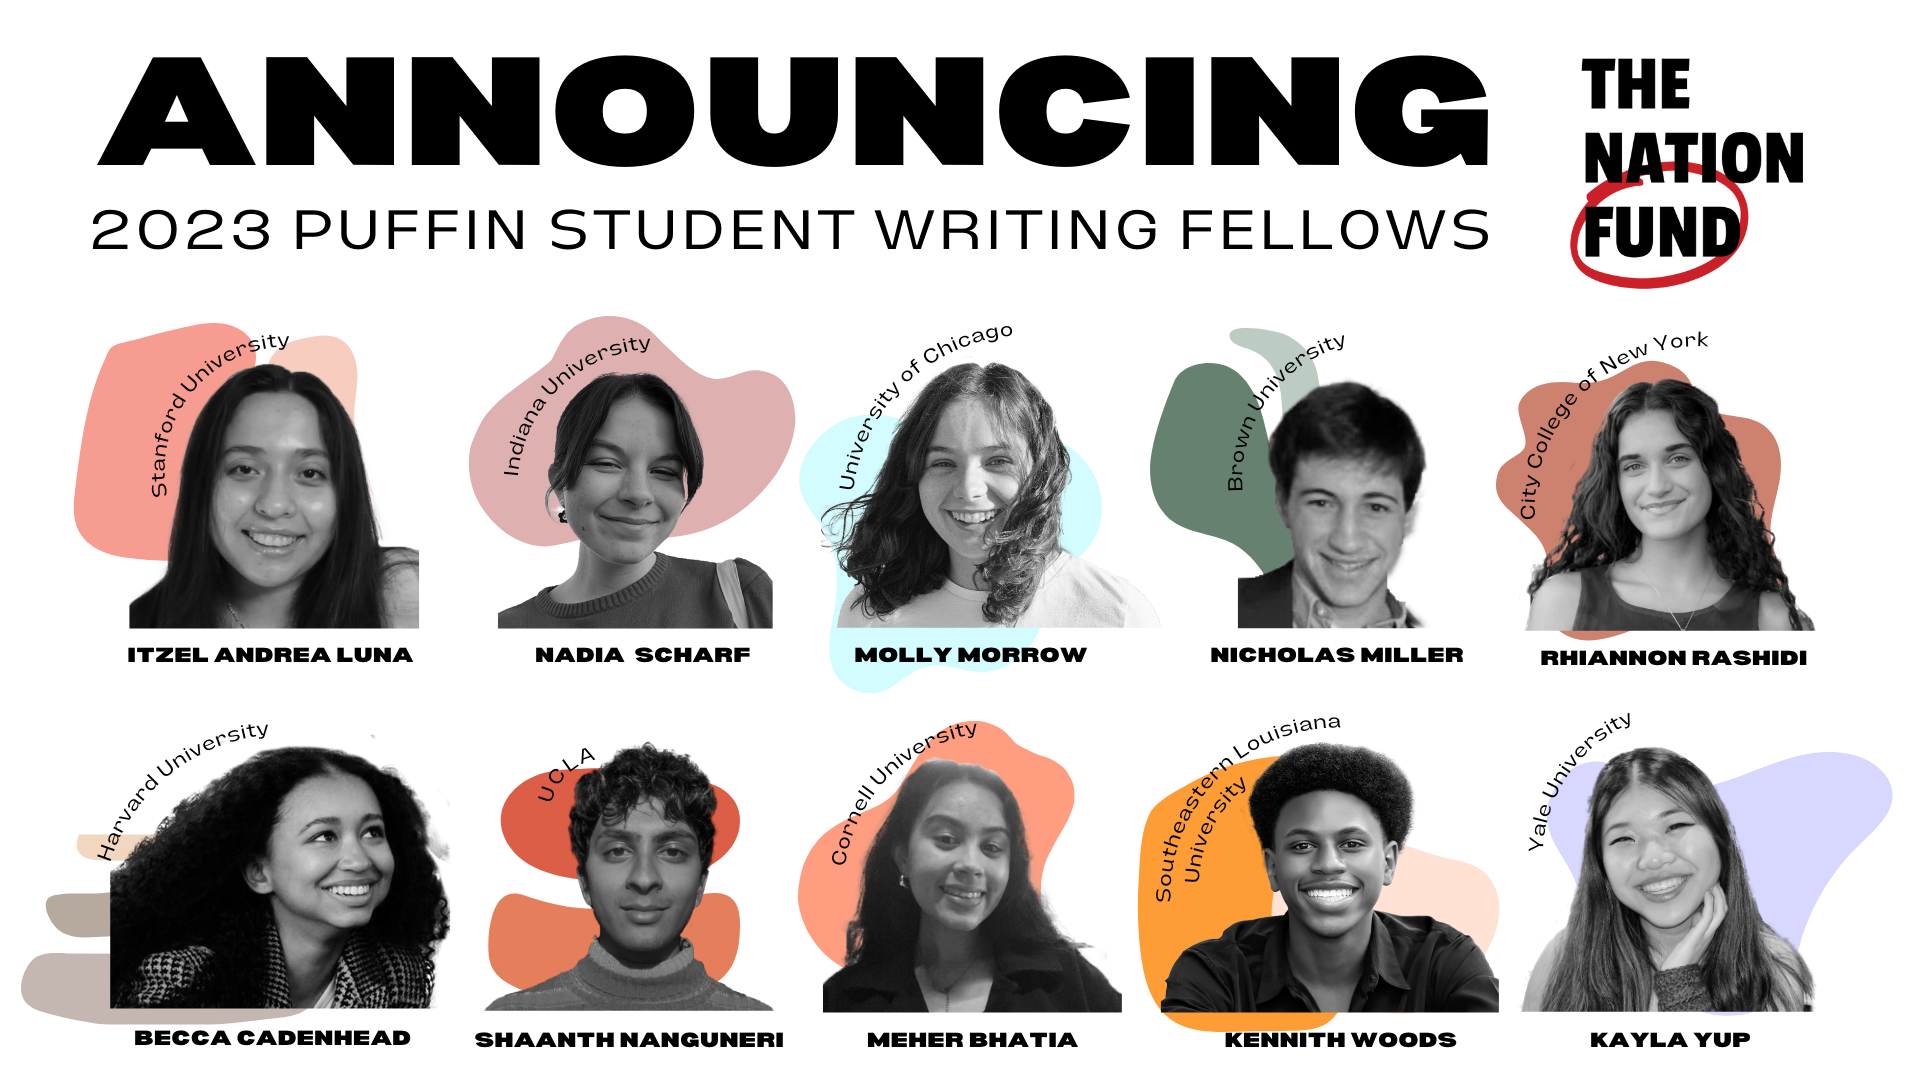 Introducing the 2023 Puffin Student Writing Fellows